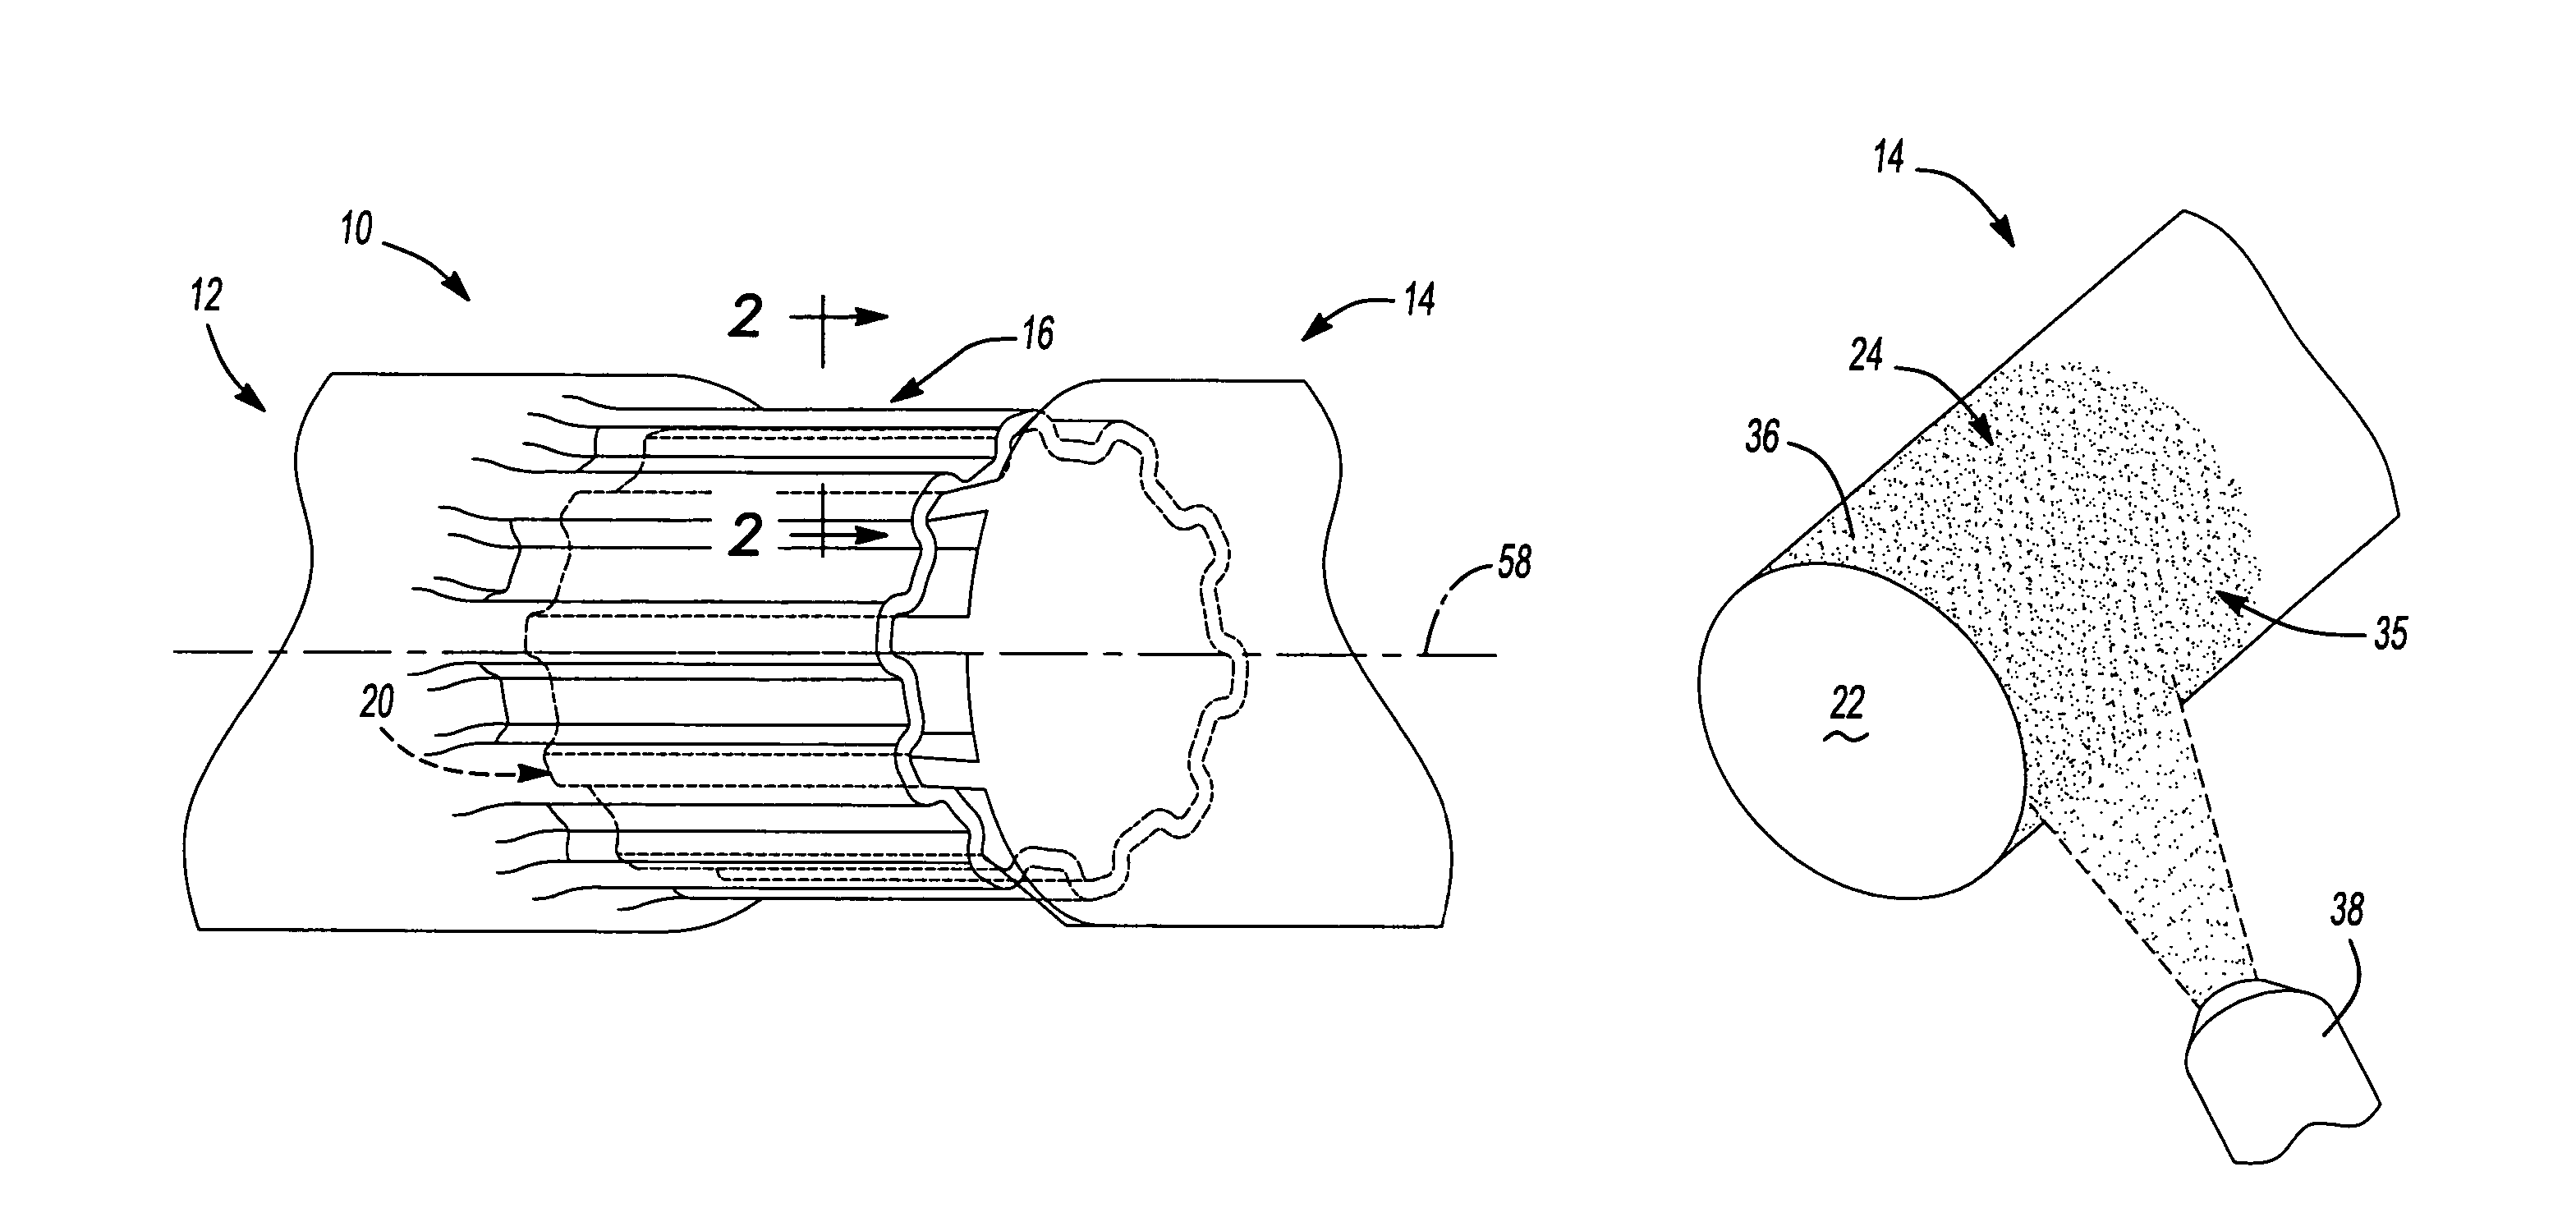 Method for forming a slip joint assembly with coated splines